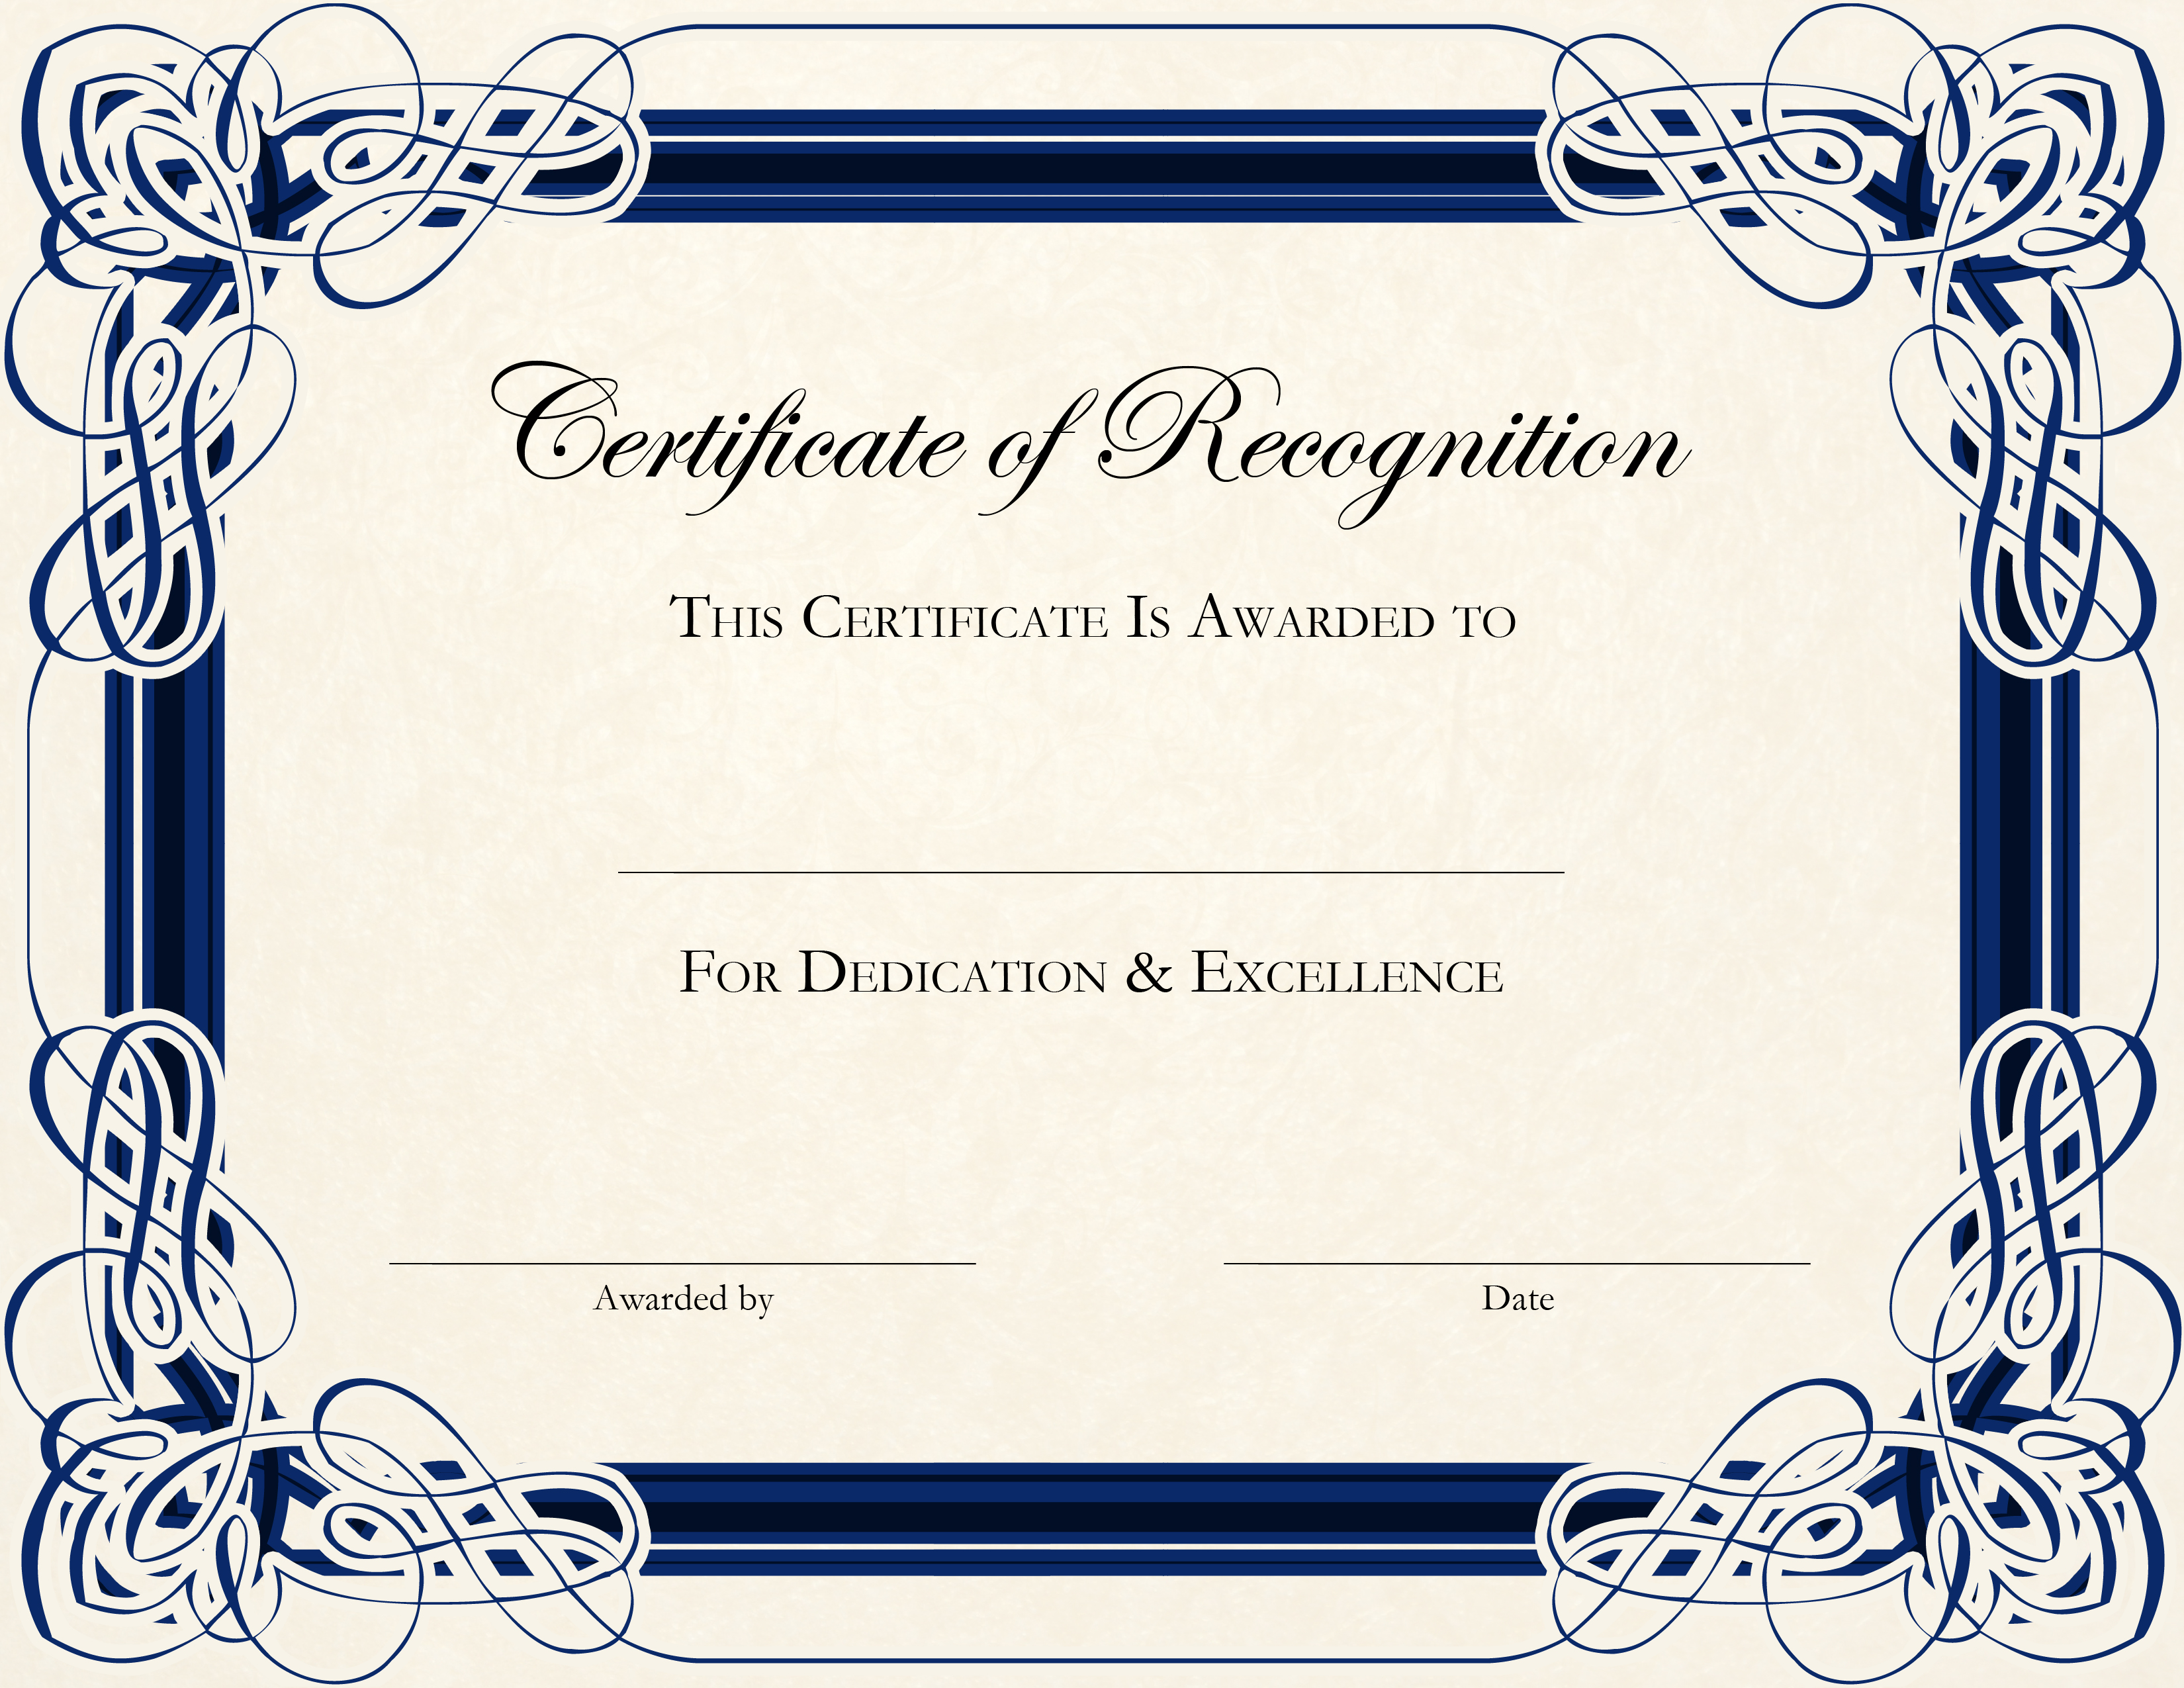 22 Editable Microsoft Certificate Templates Images - Free Editable Intended For Blank Award Certificate Templates Word